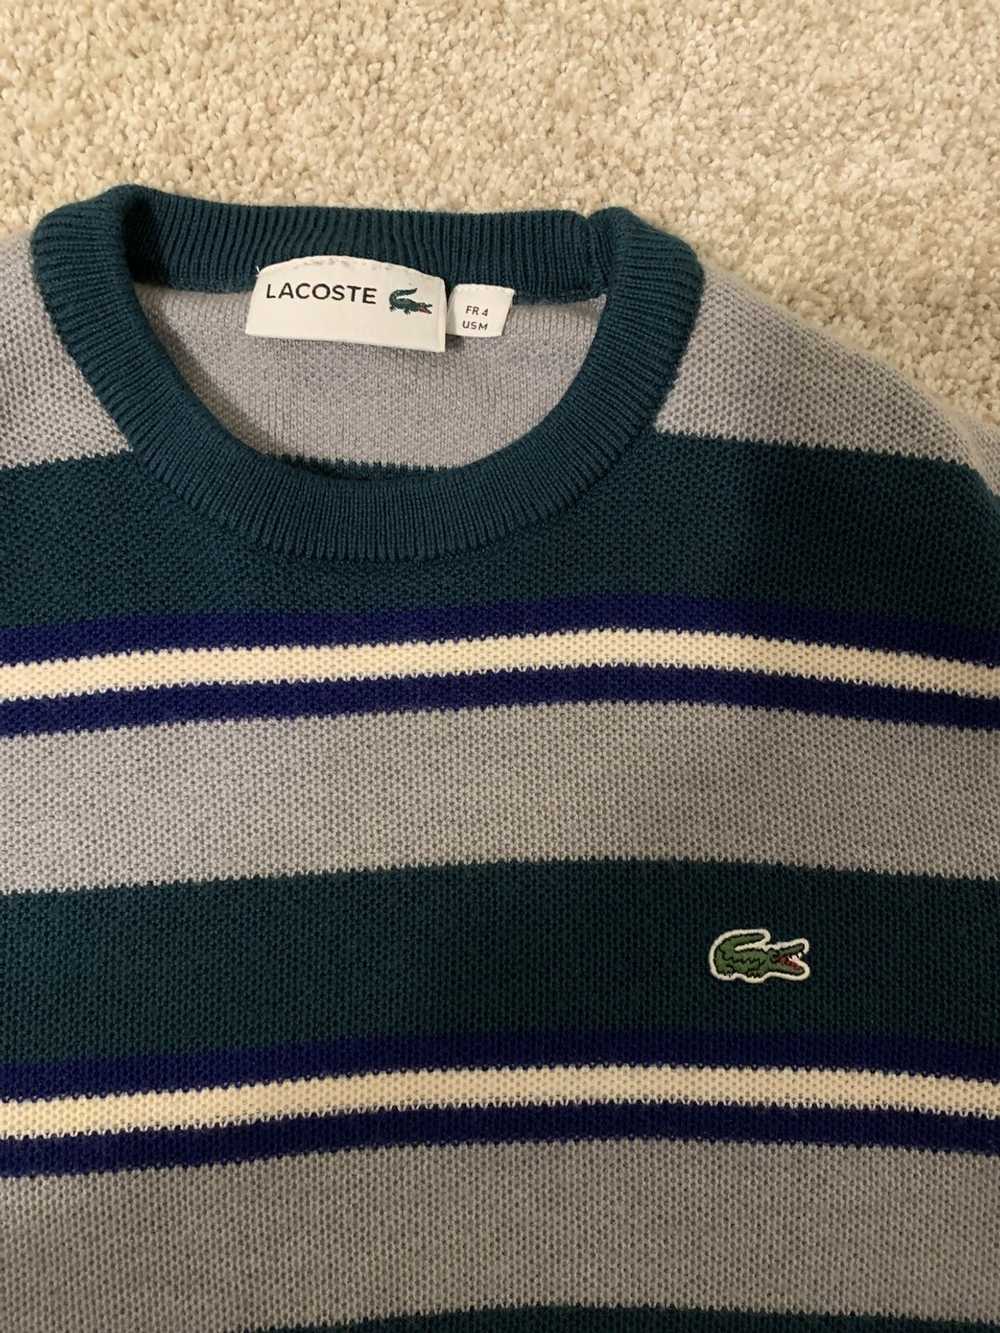 Lacoste Striped Lacoste Sweater - image 2